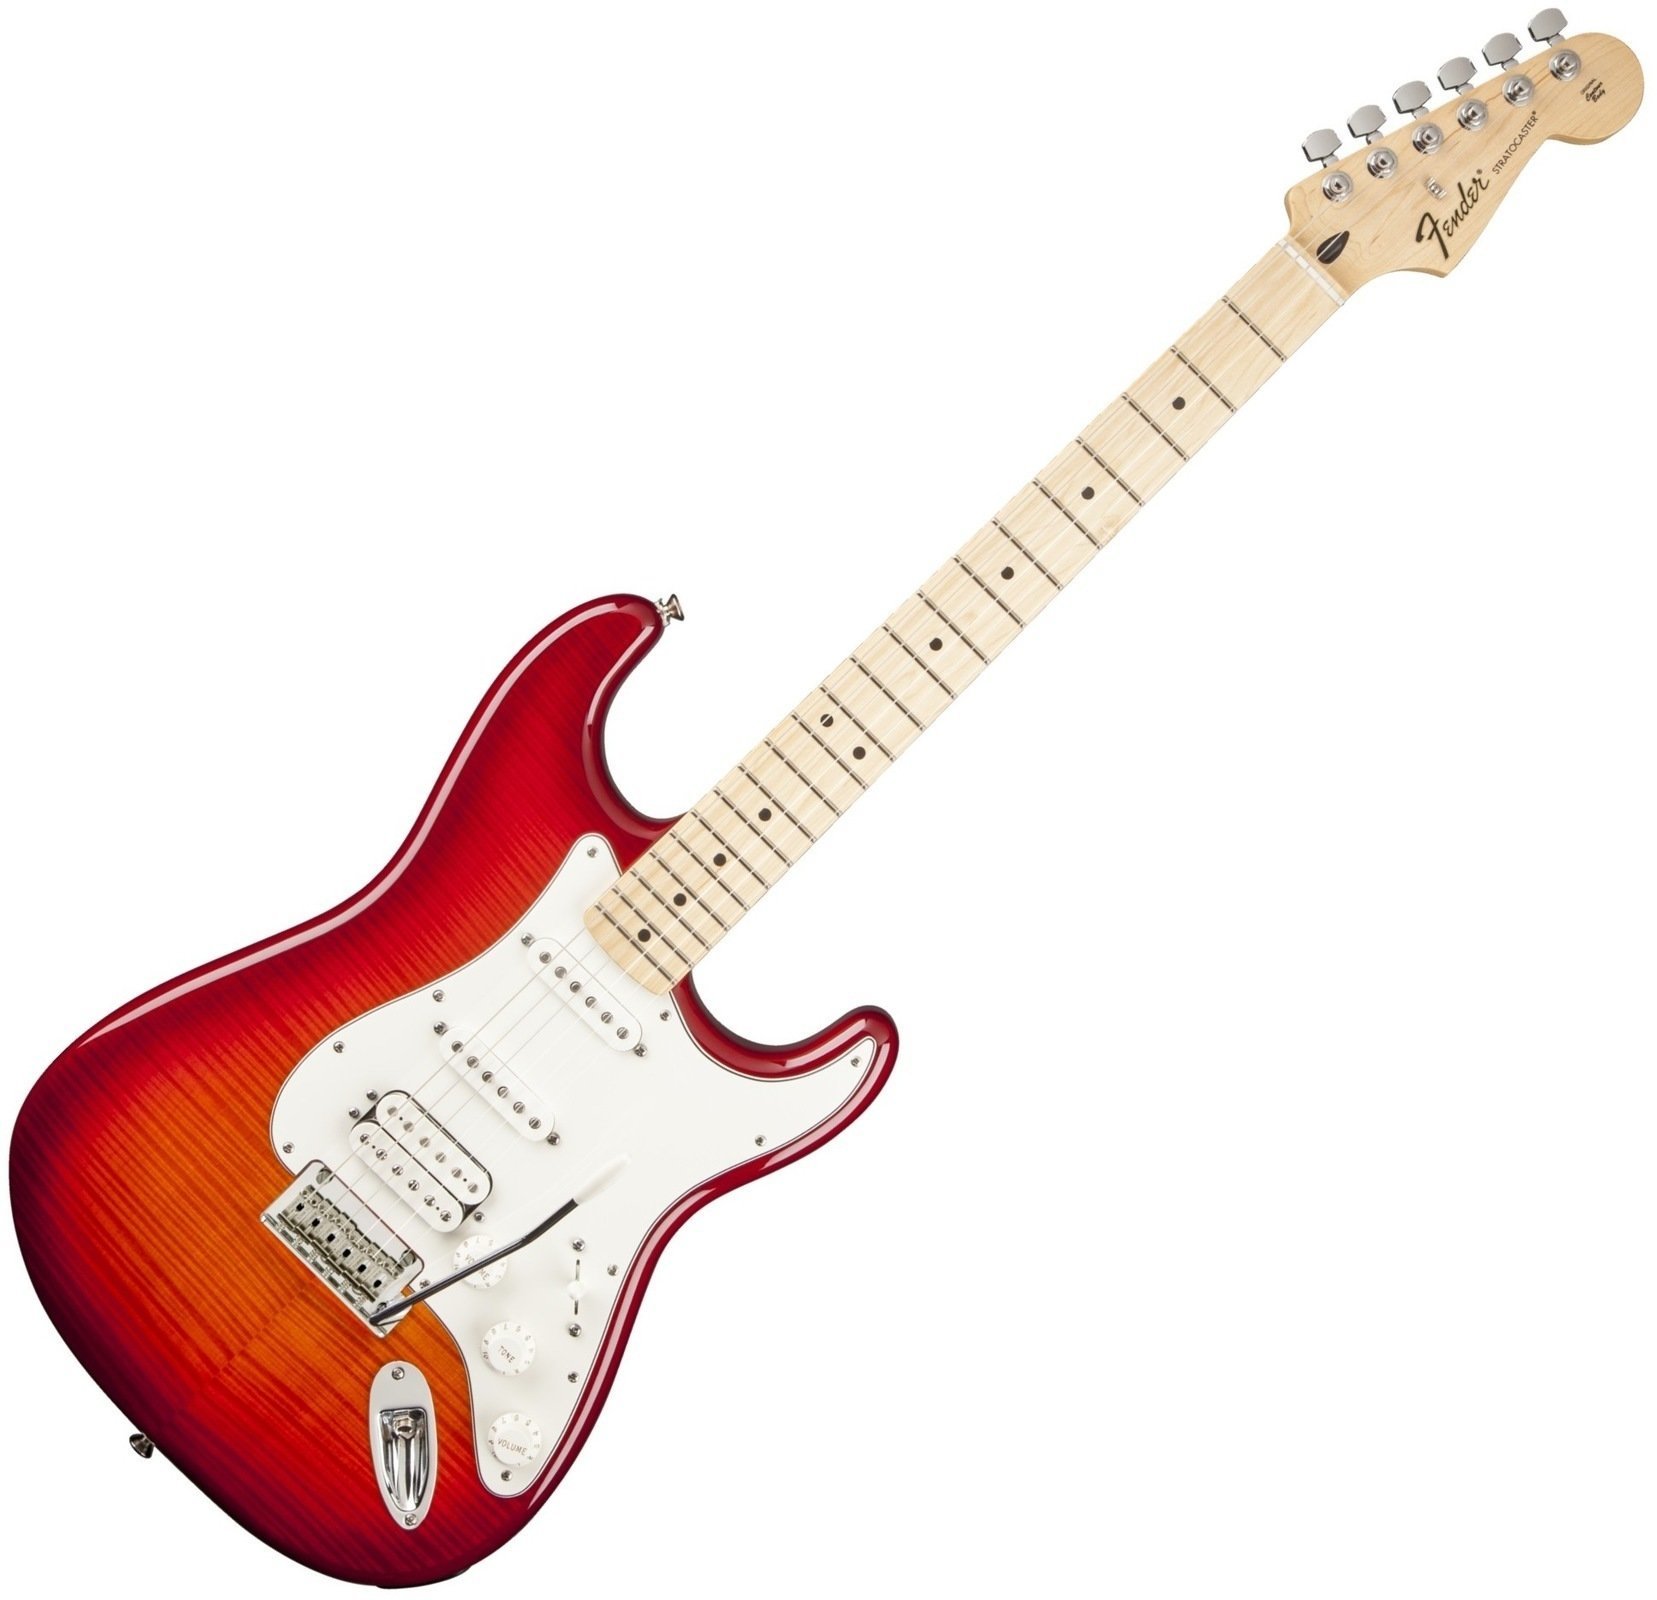 E-Gitarre Fender Deluxe Stratocaster HSS Plus Top with iOS Connectivity,Maple Fingerboard, Aged Cherry Burst